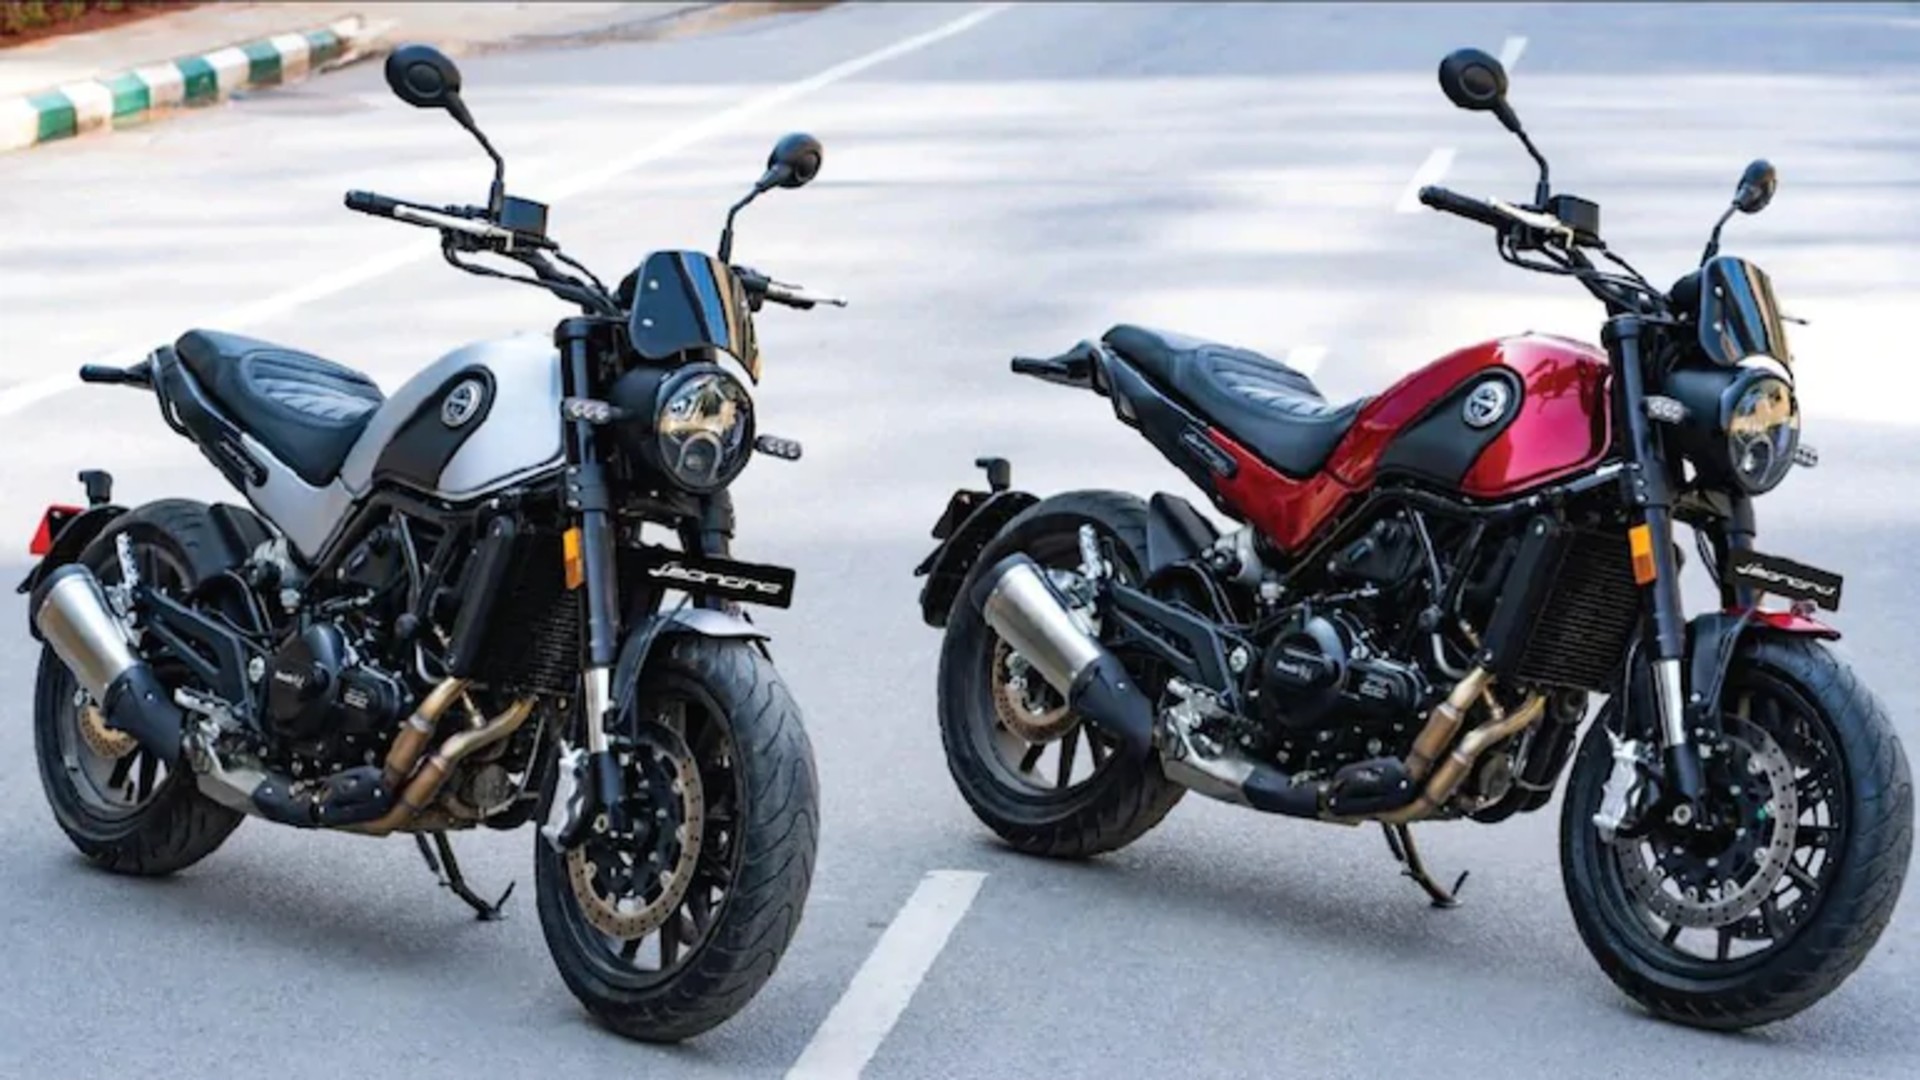 2021 Benelli Leoncino 500 BS6 Launched - IMP